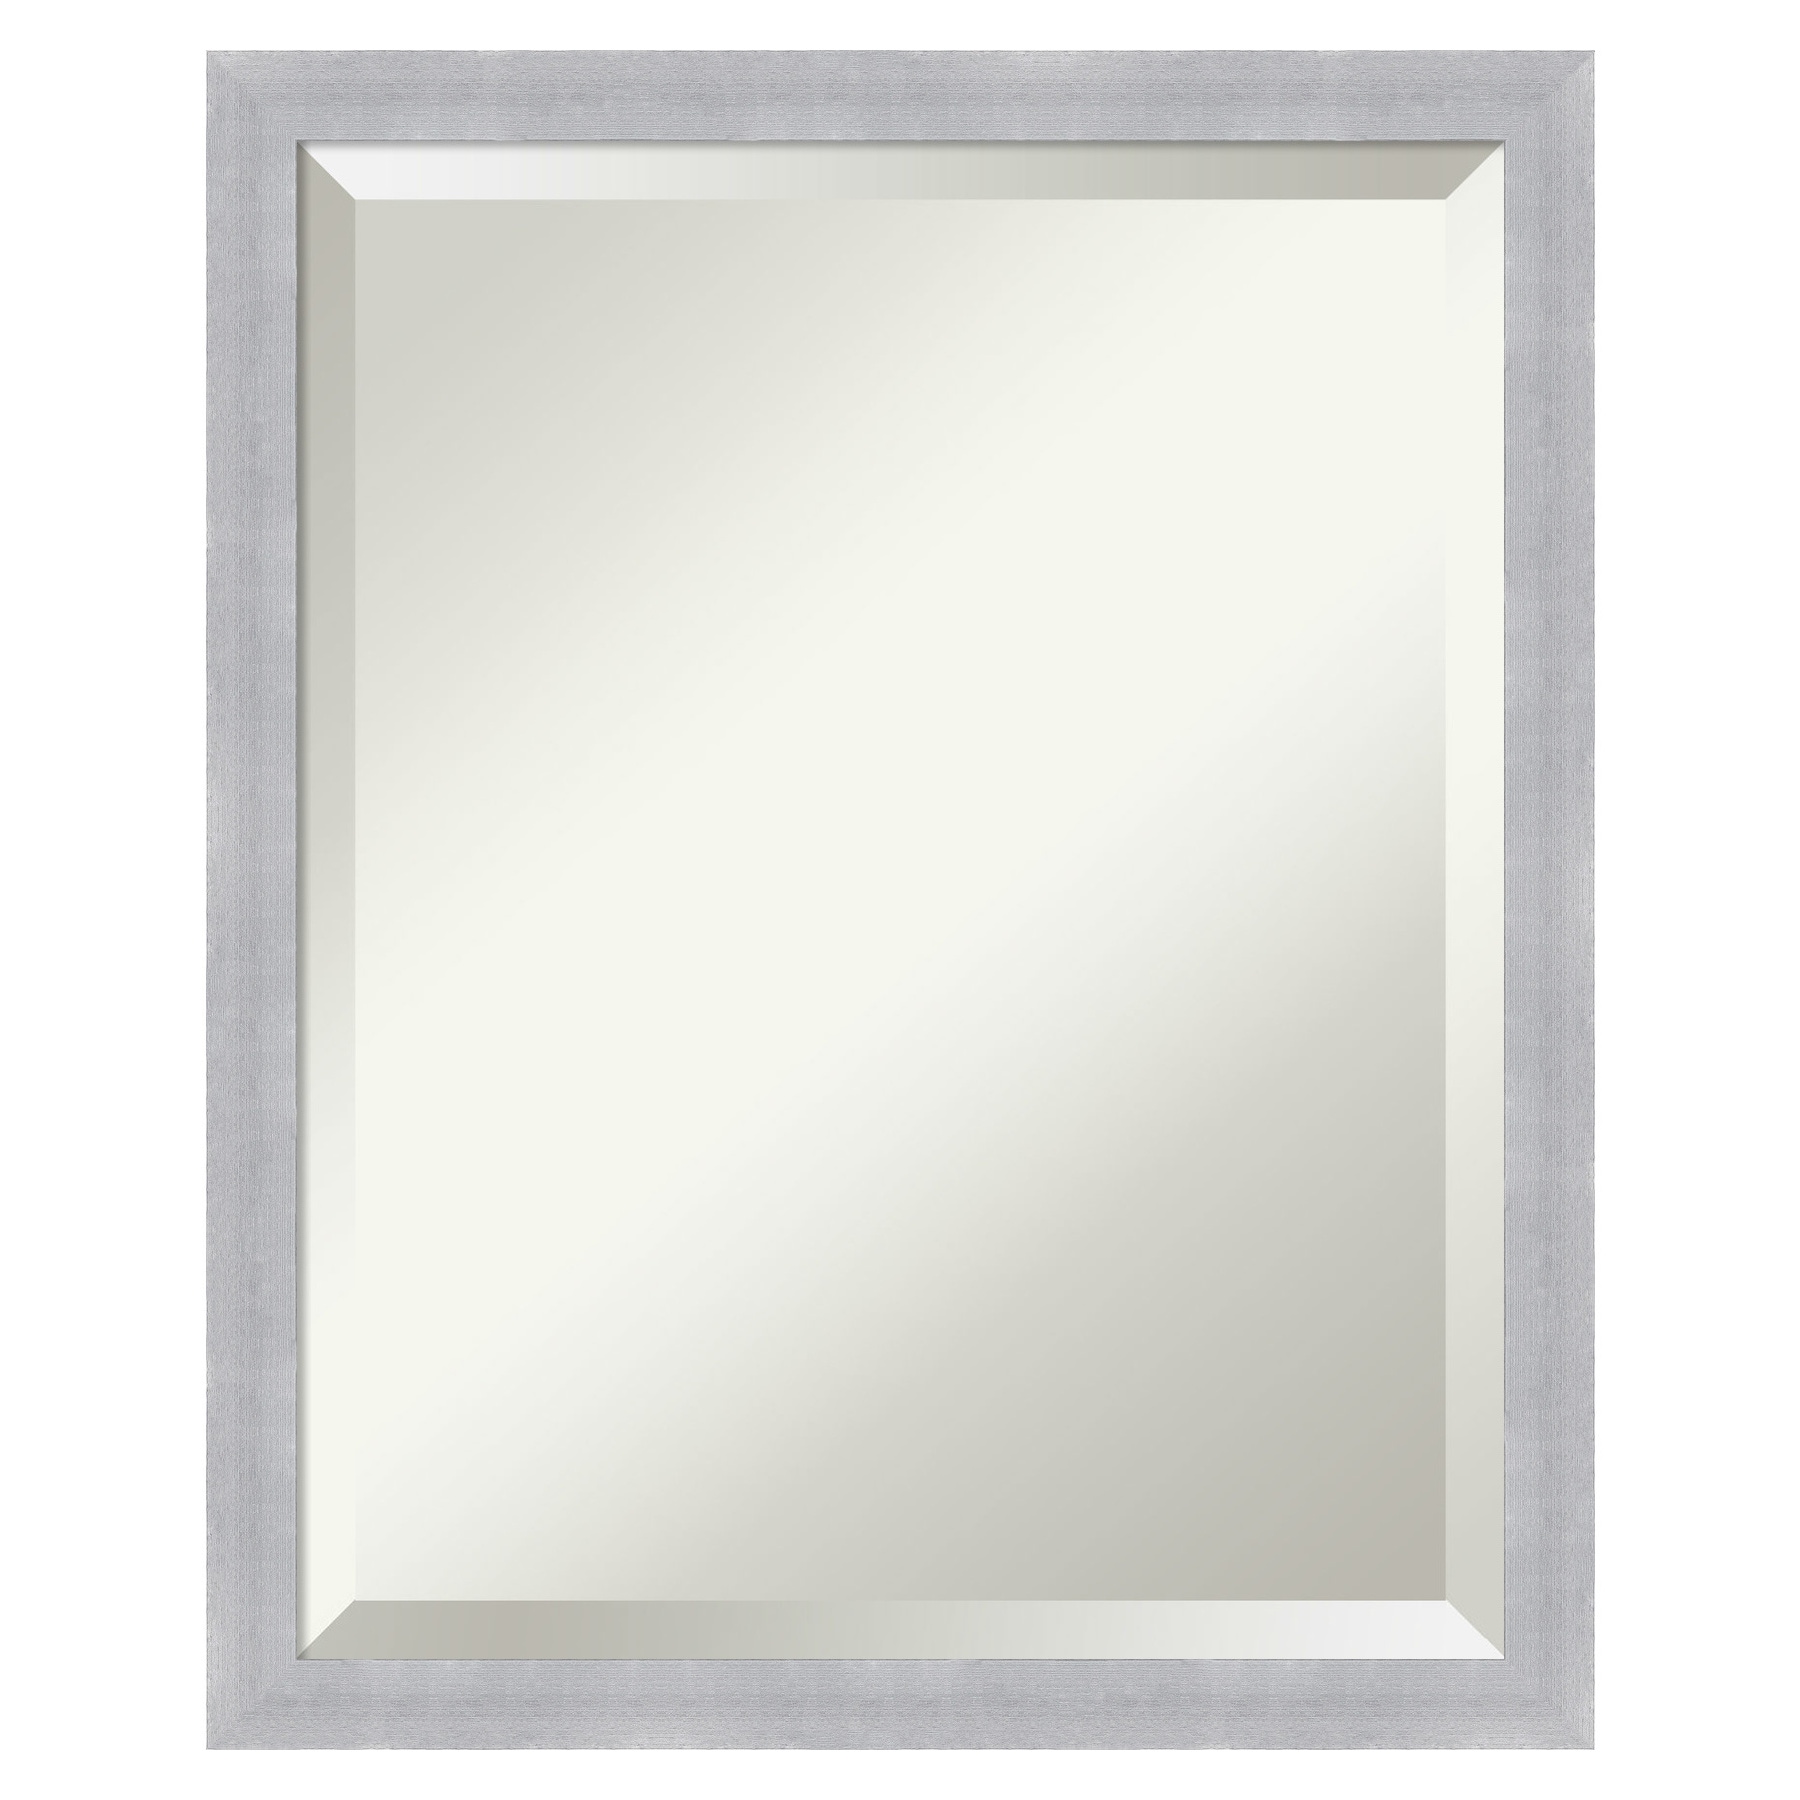 Amanti Art x 21.88-in Silver at Matte the Framed W Wall department Mirror H in Grace Mirrors 17.88-in Nickel Brushed